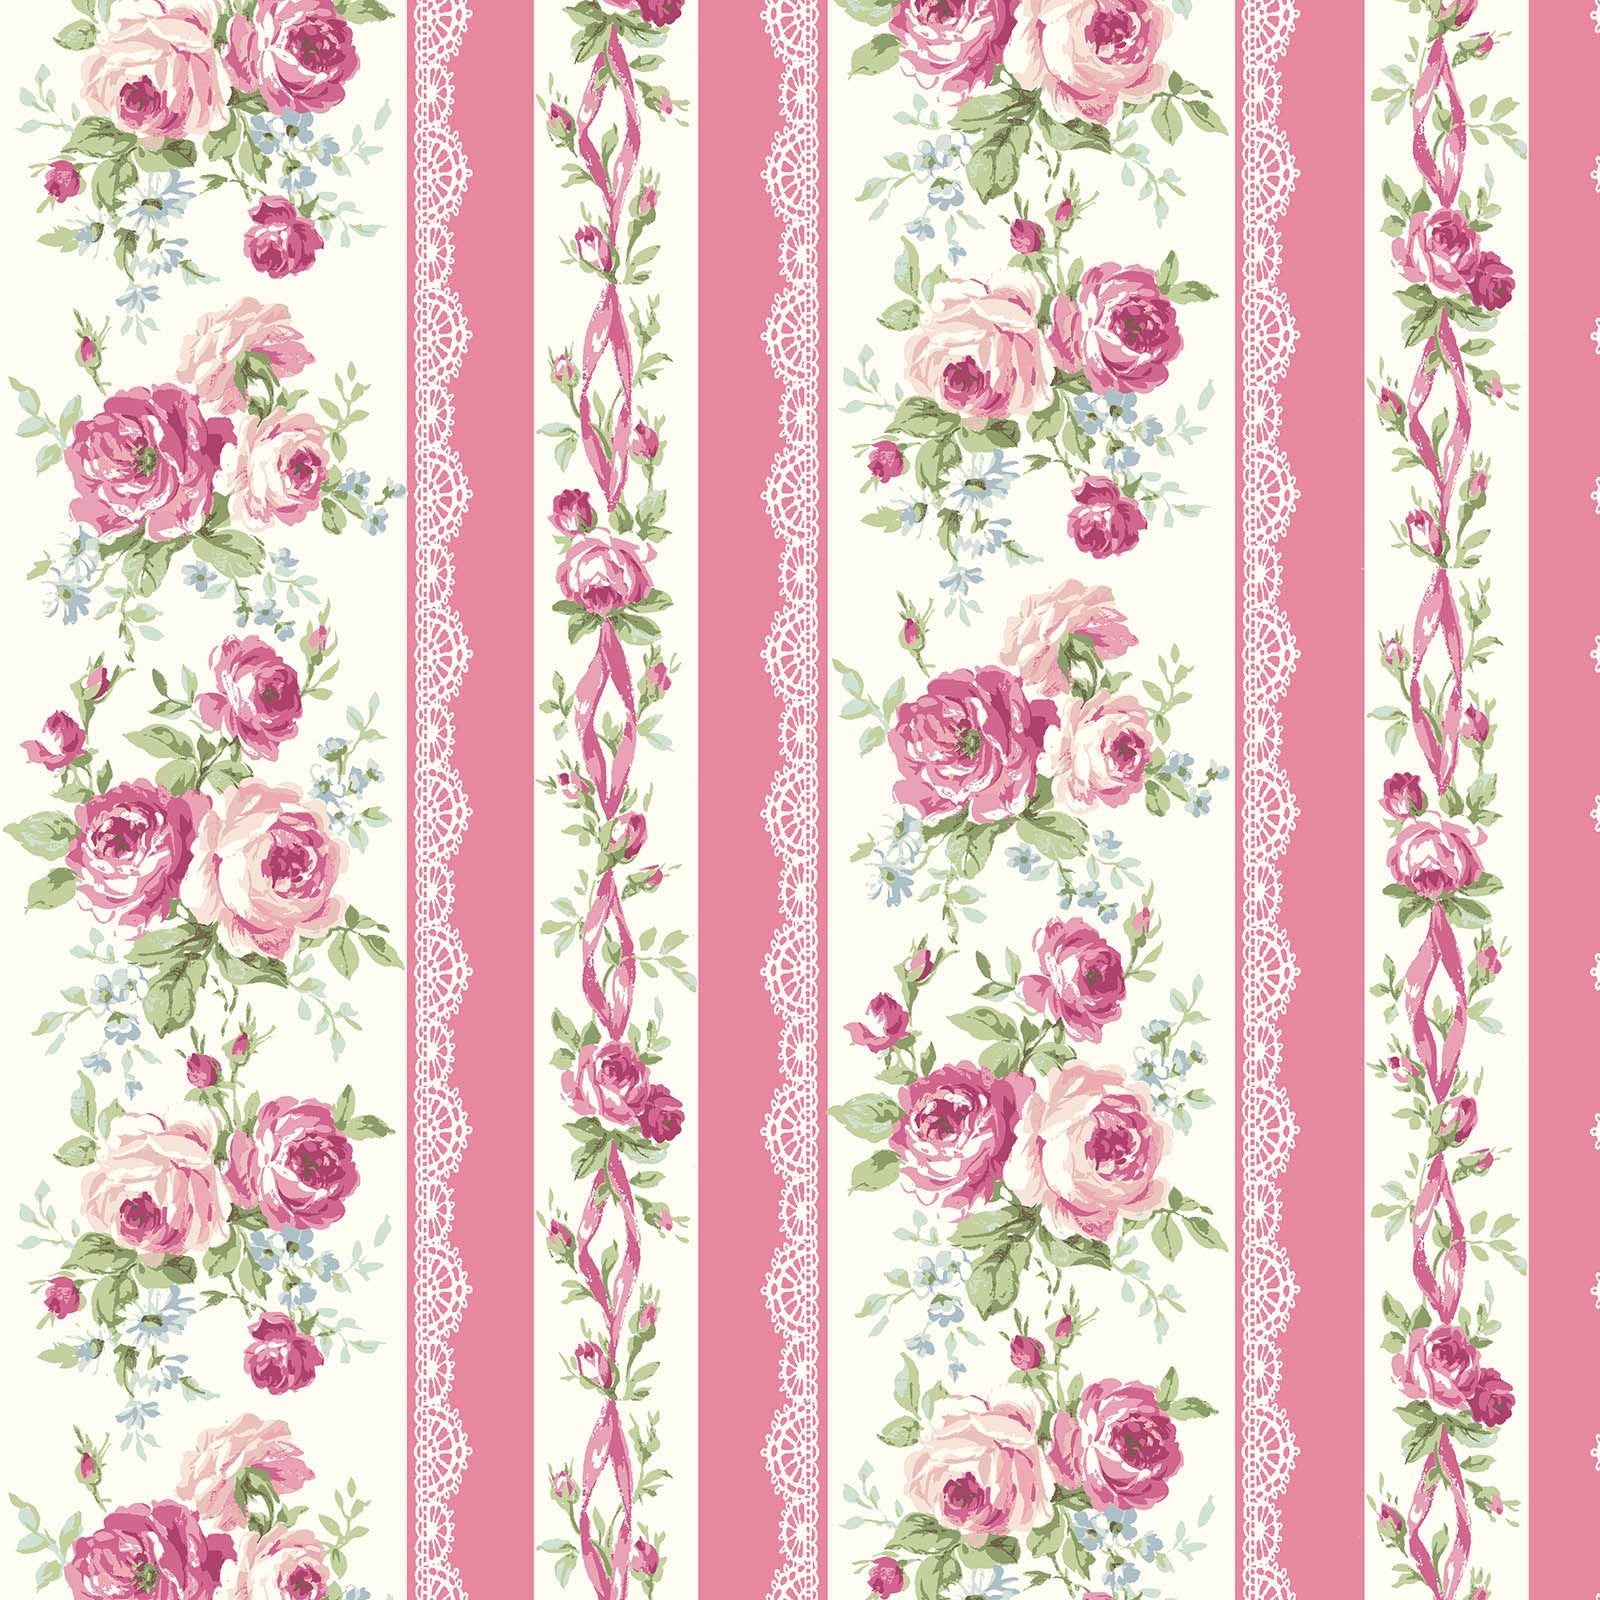 Rose Waltz RuRu Bouquet cotton fabric by Quilt Gate Ru2450-12F Roses and Ribbons on Dark Pink